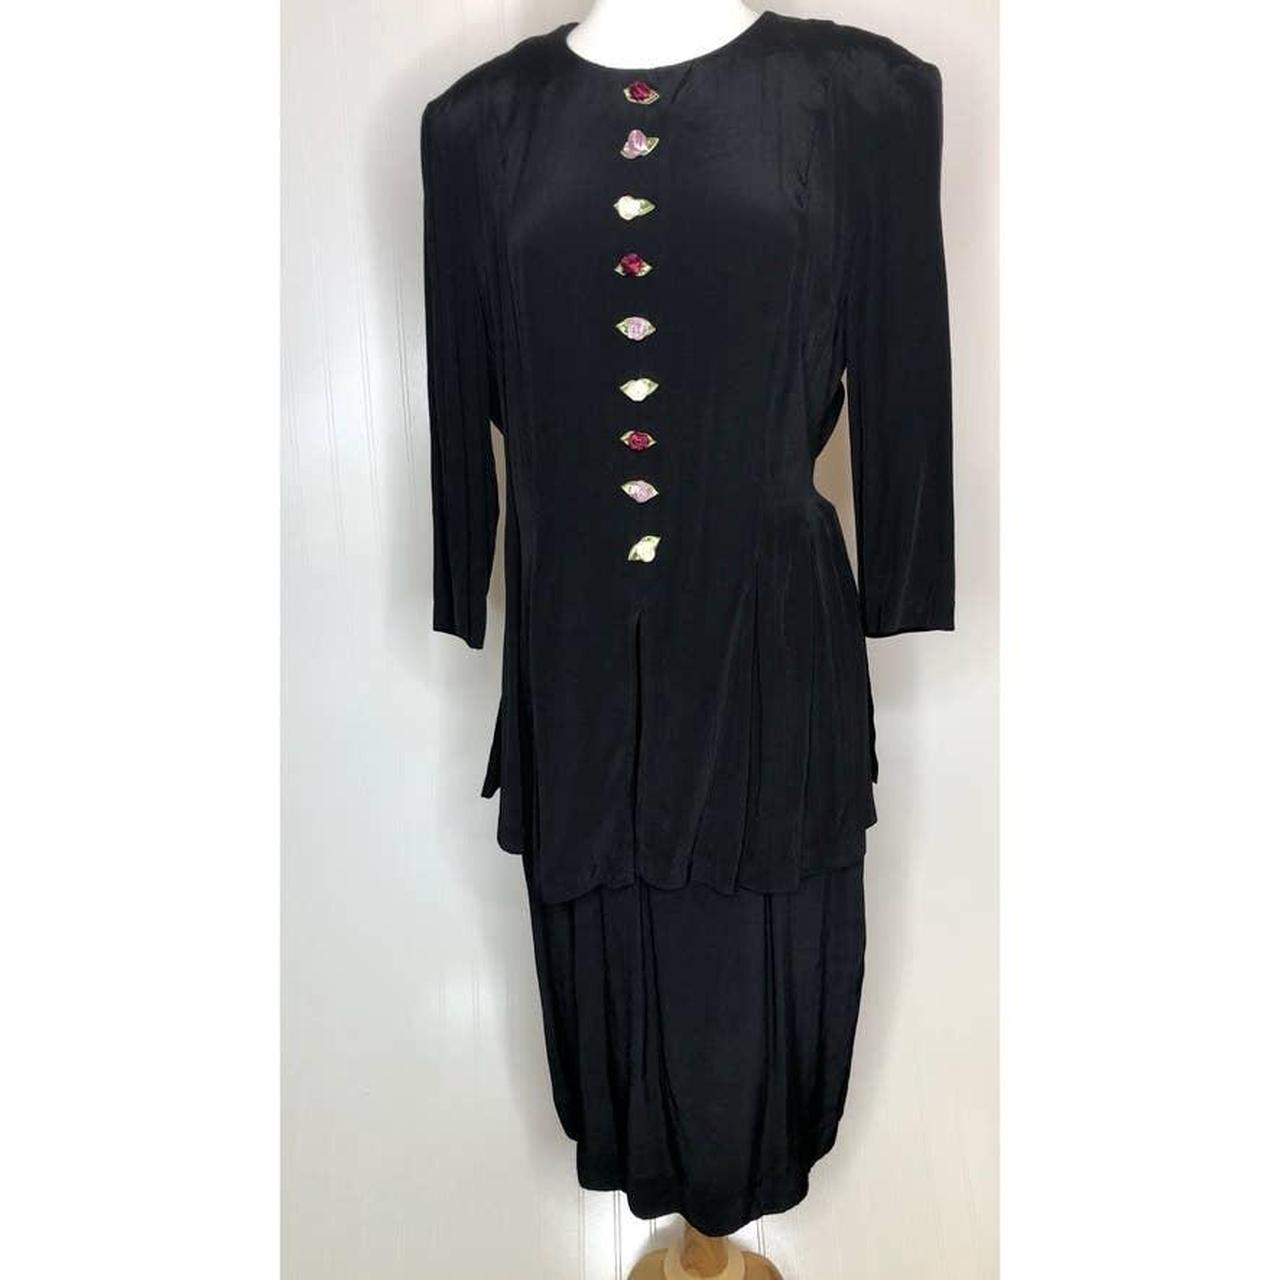 Product Image 2 - Vintage 80s/90s Tunic & Skirt